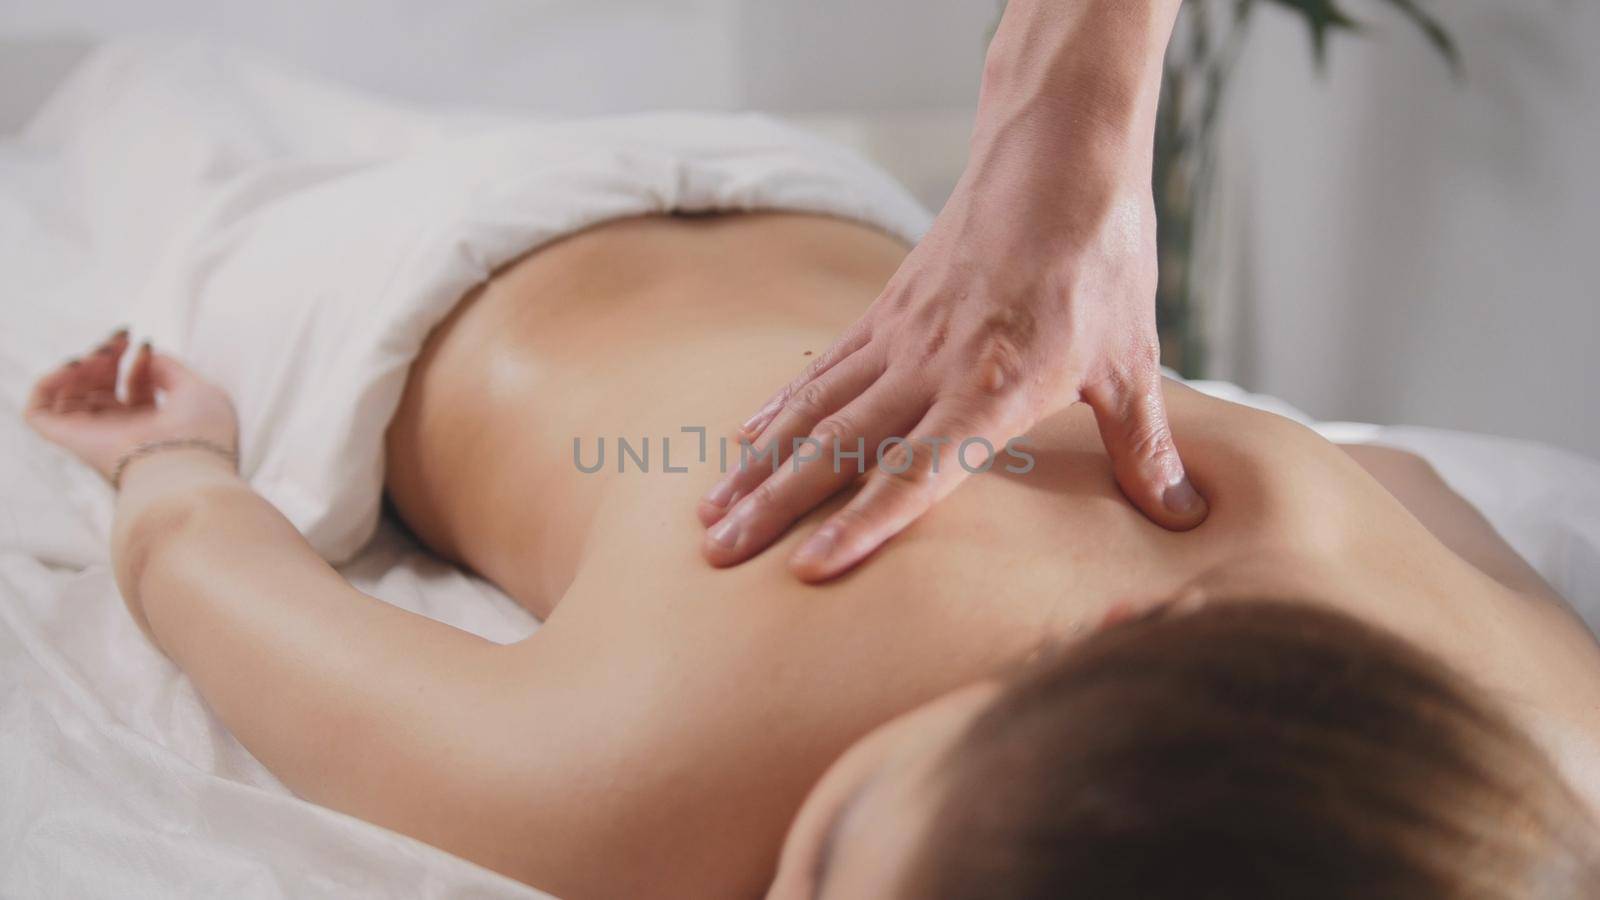 Blonde young woman model receiving relaxing massage in spa room, close up view